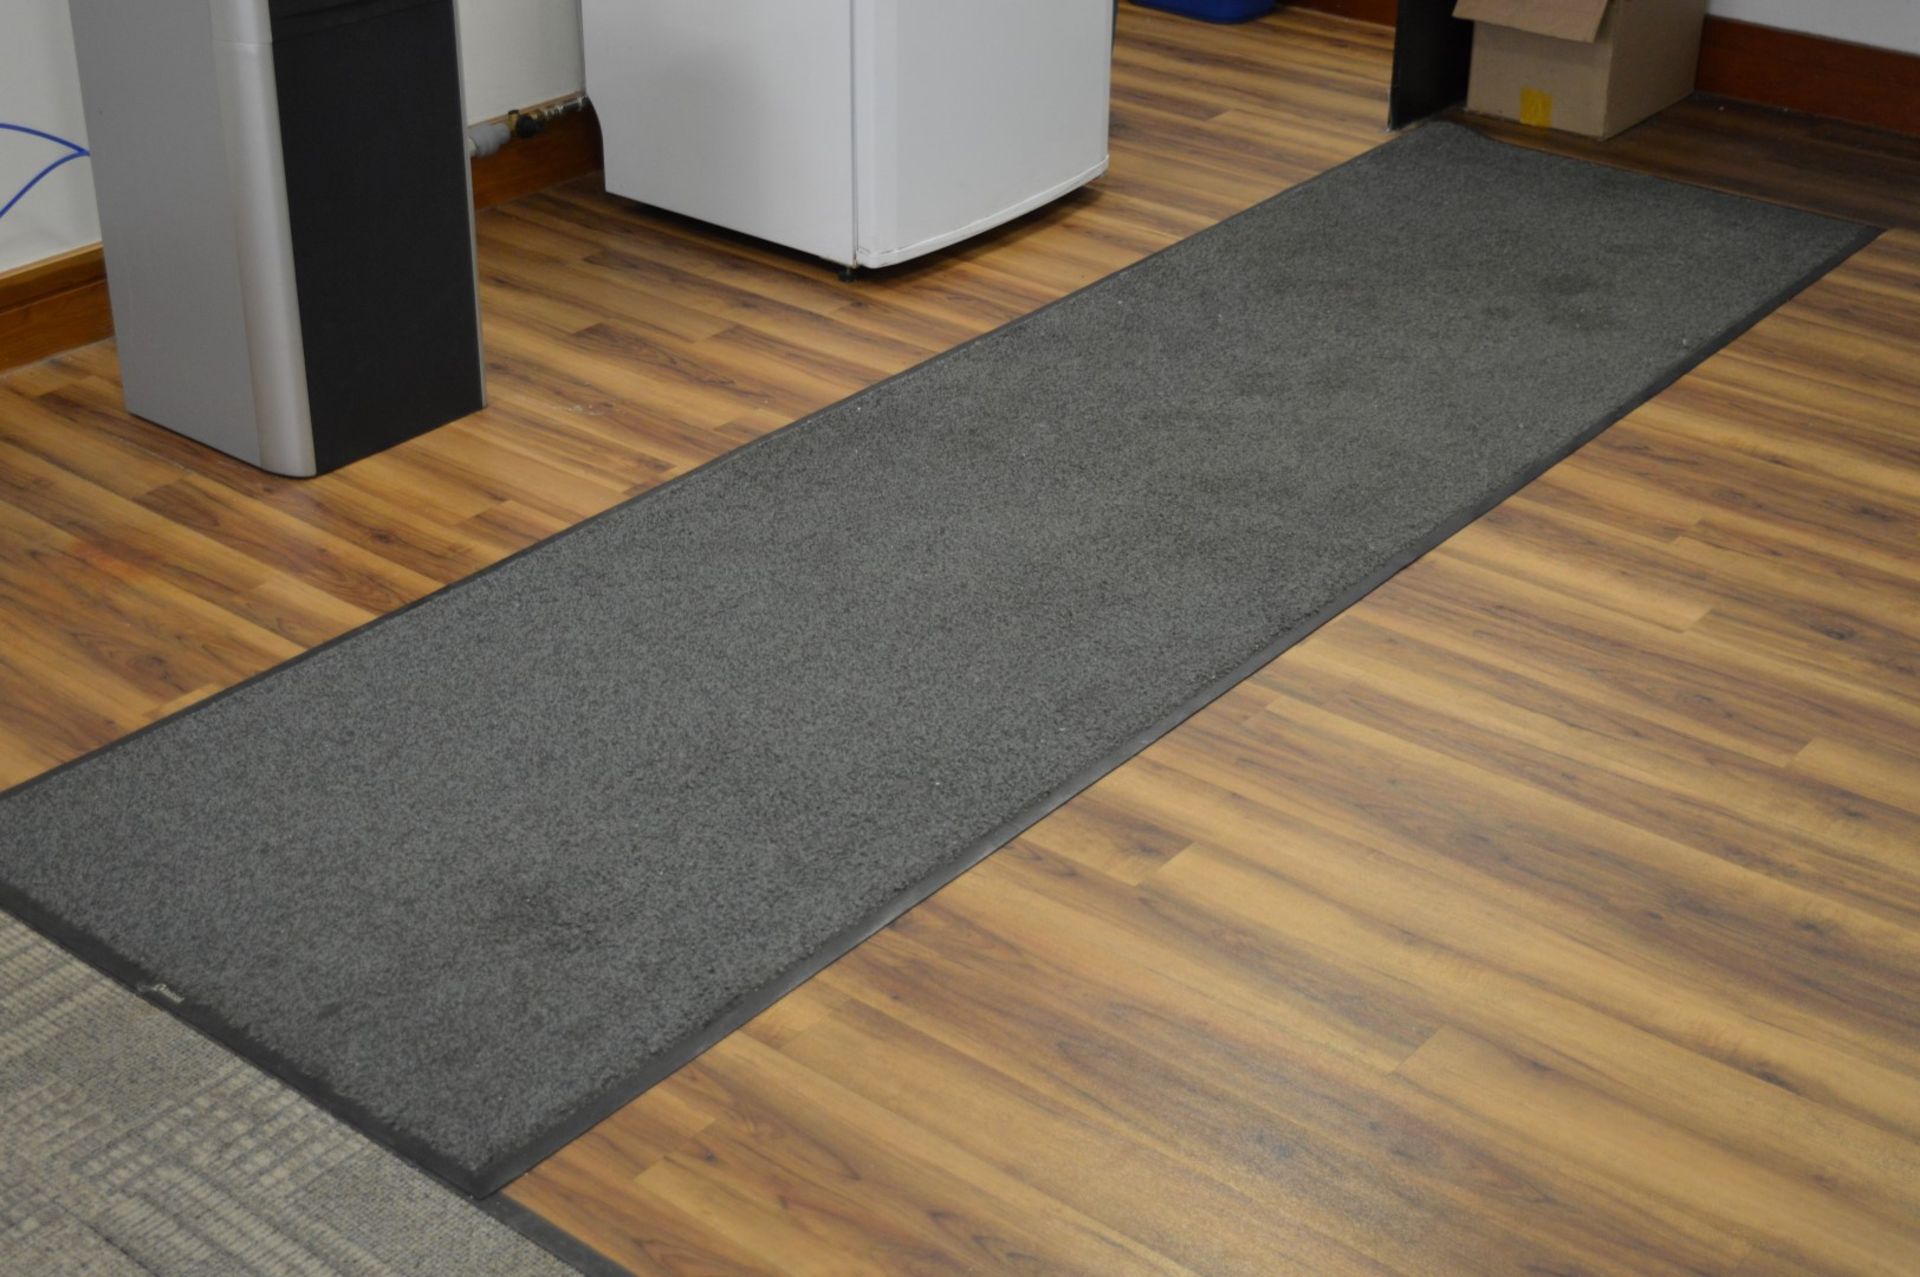 1 x Initial Entrance Floor Mat - Dark Grey With Rubber Backing - Fire Resistant - Helps Prevent